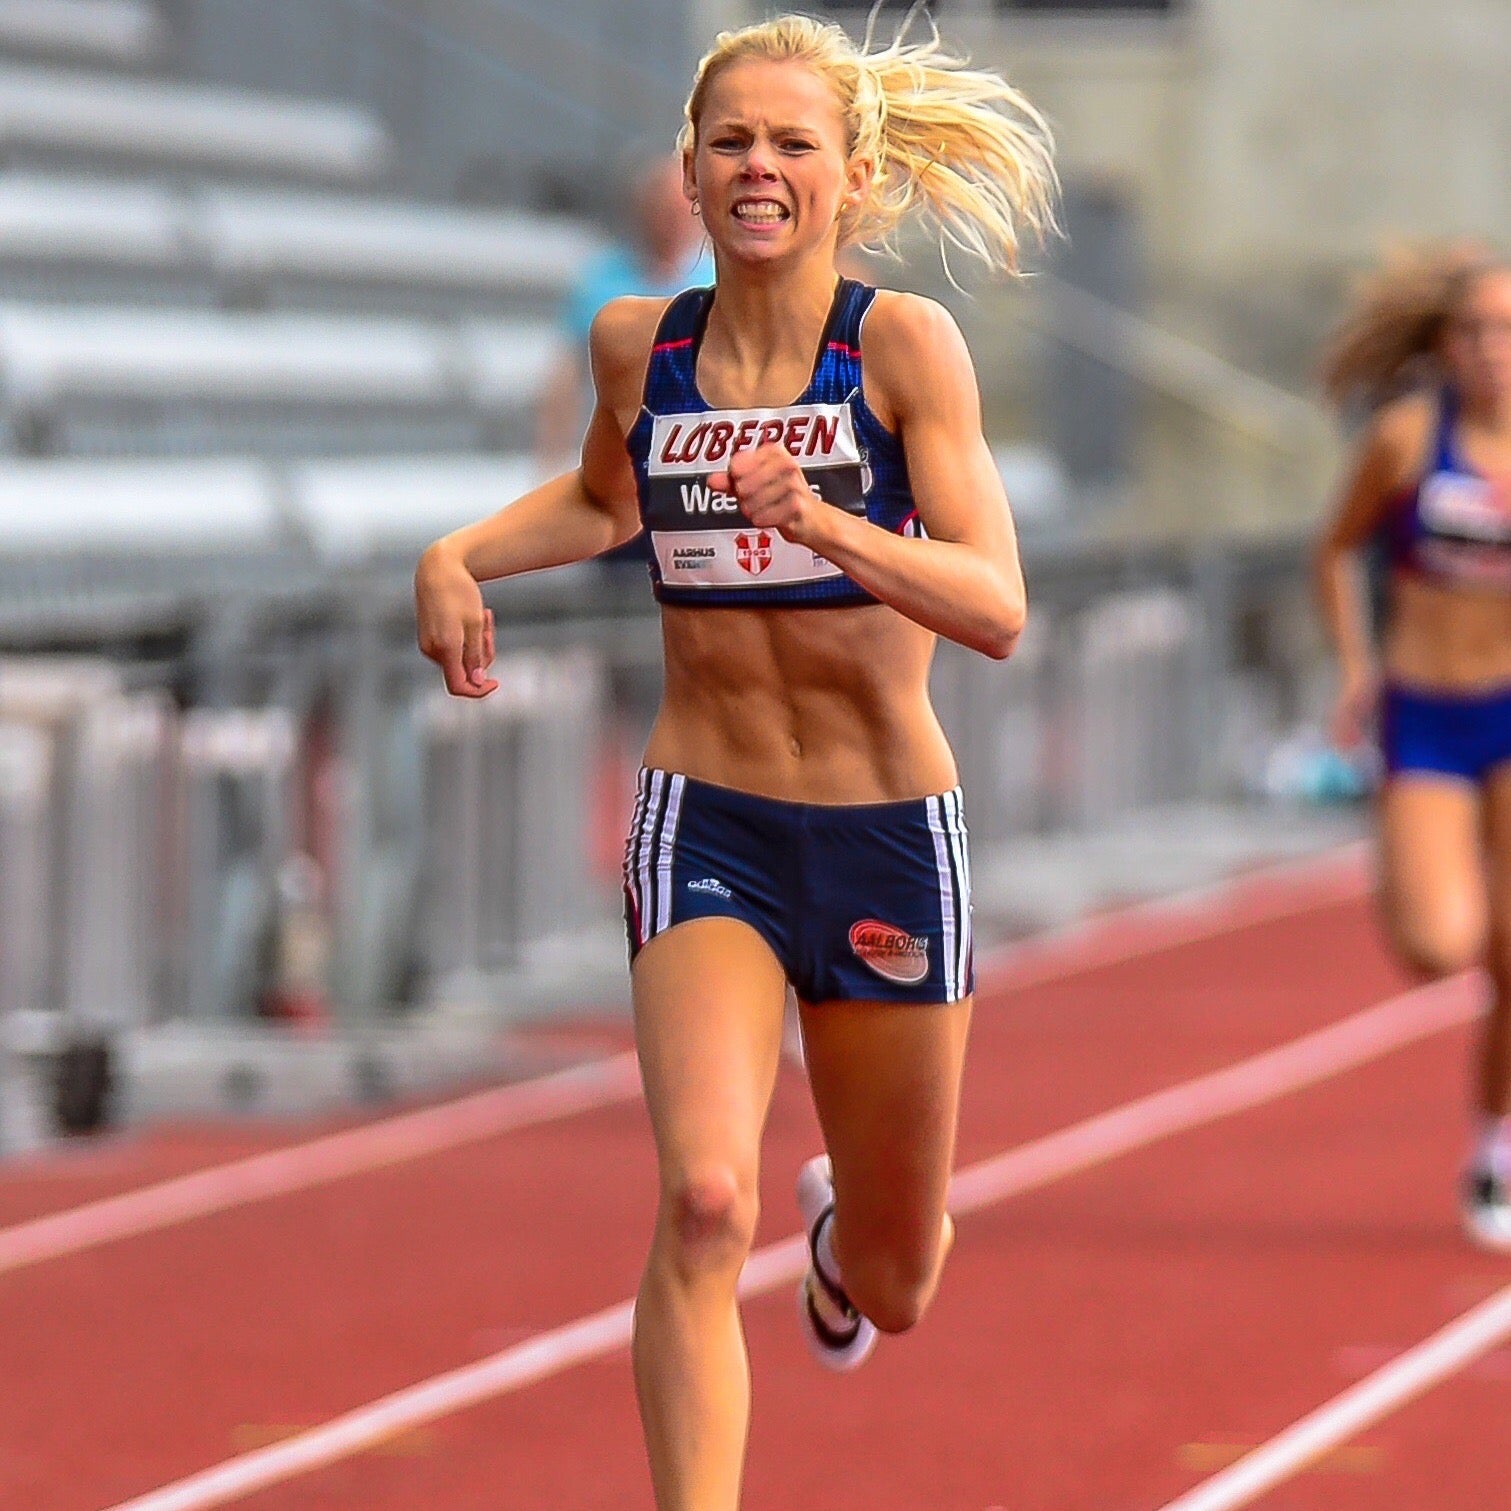 Elite runner Freja Wærness is absolutely crazy about the new snack bars.